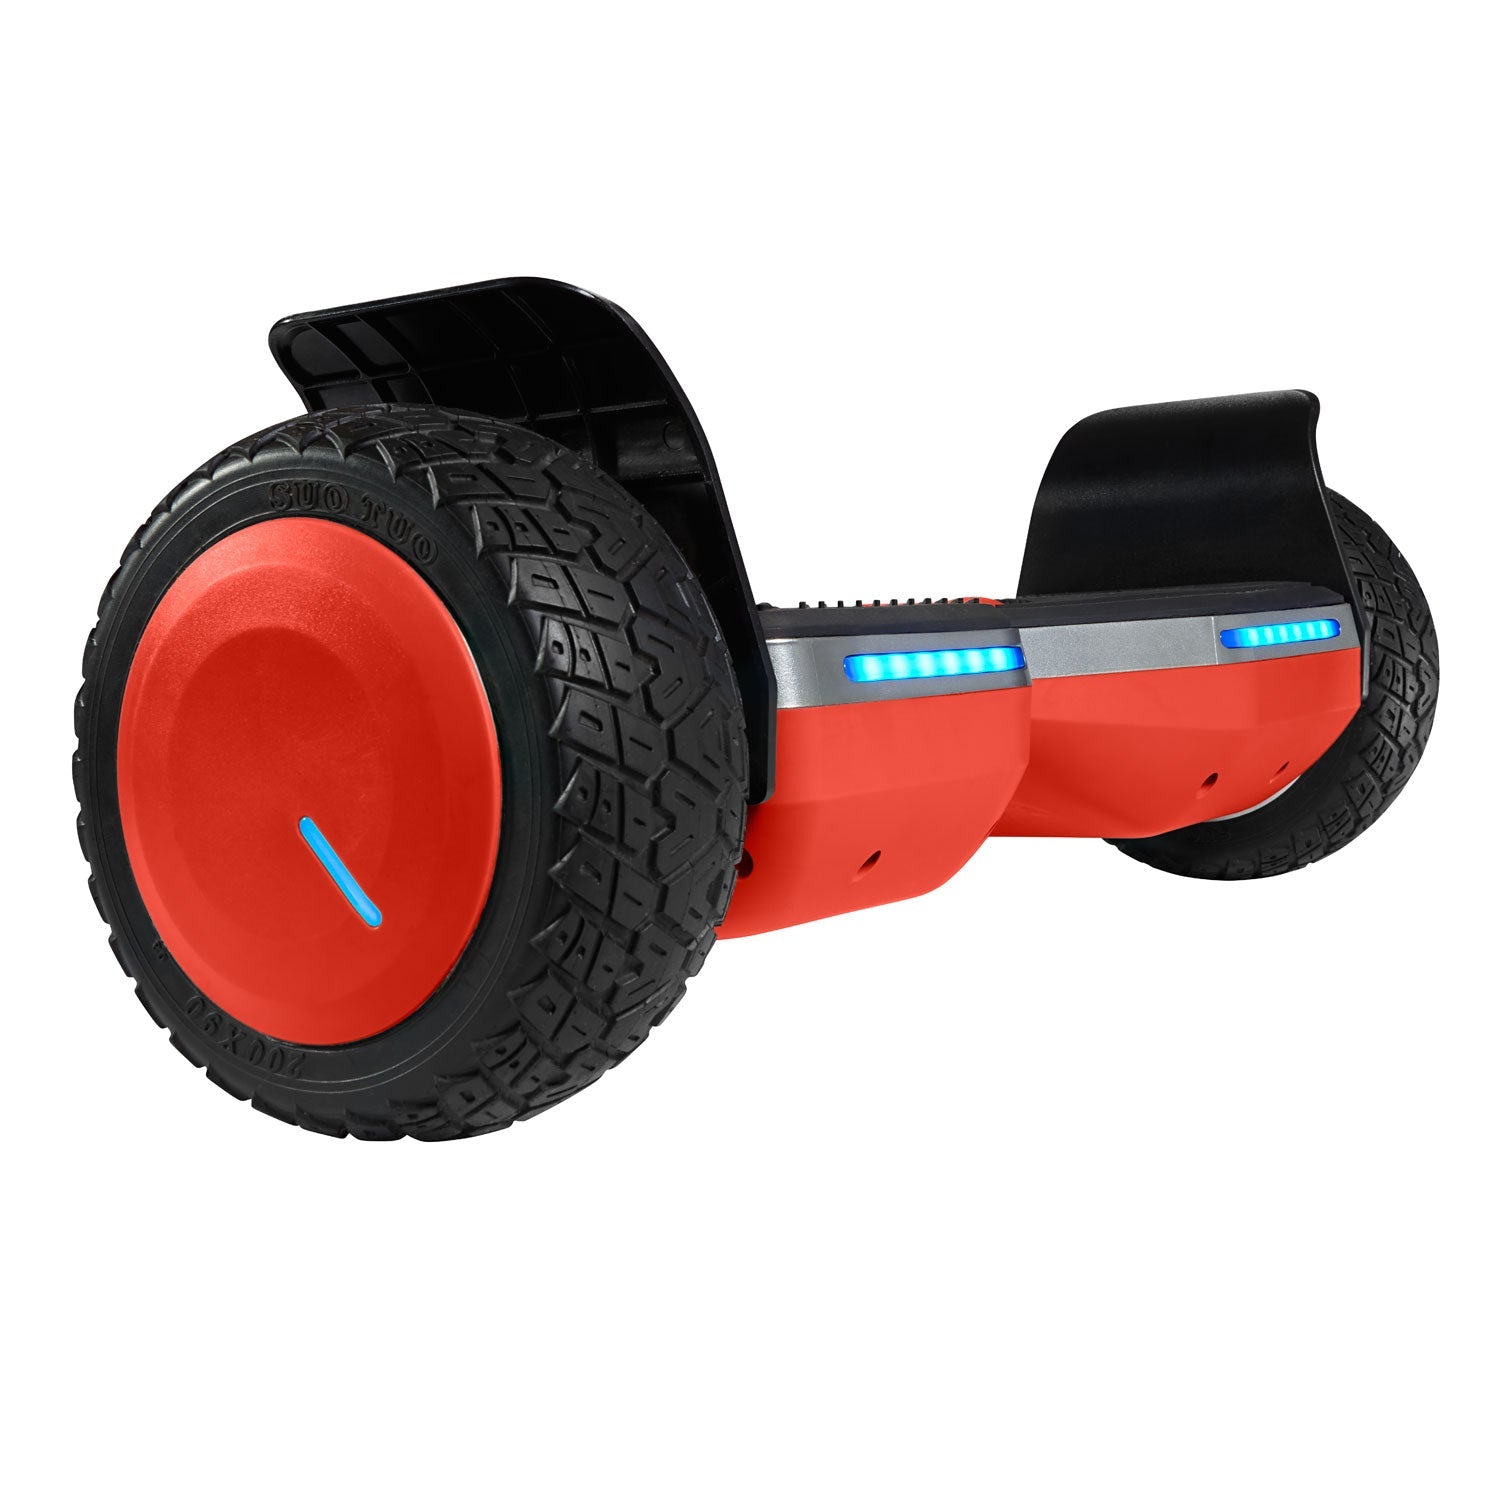  Trinity Max Hoverboard for Kids Ages 6-12, 6.5 LED